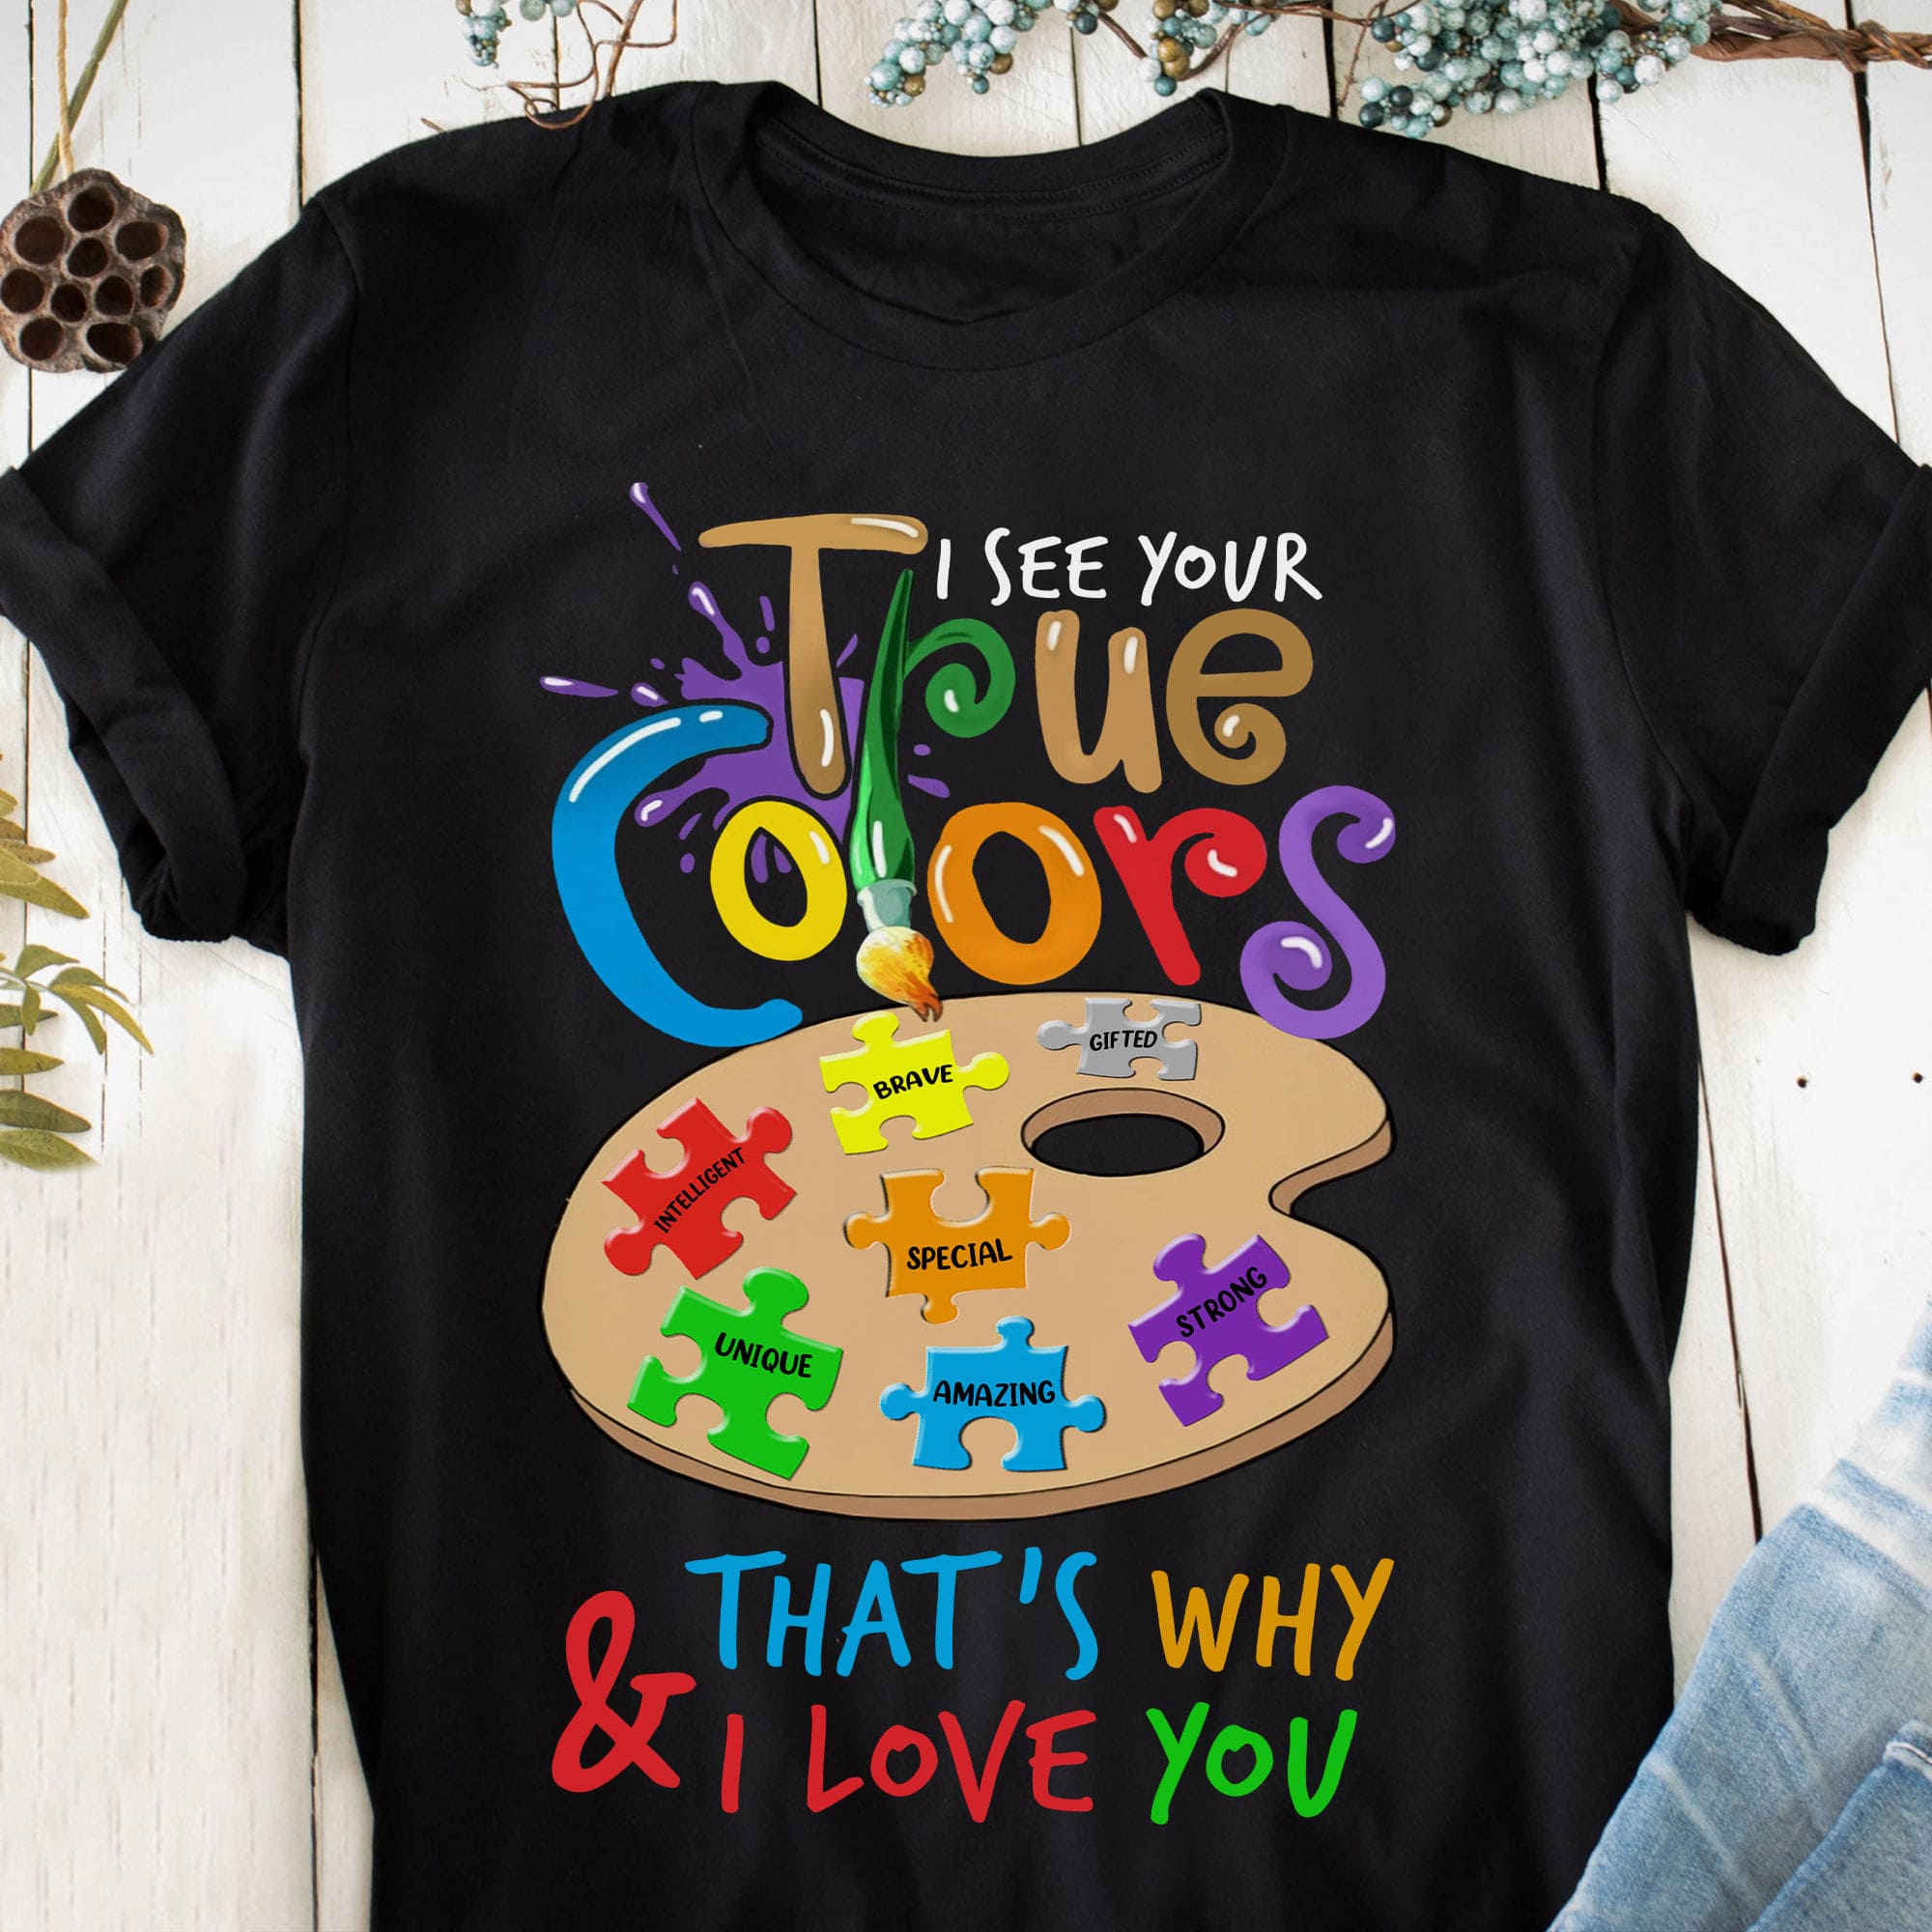 I see your true colors, that's why I love you - Autism awareness, people true color